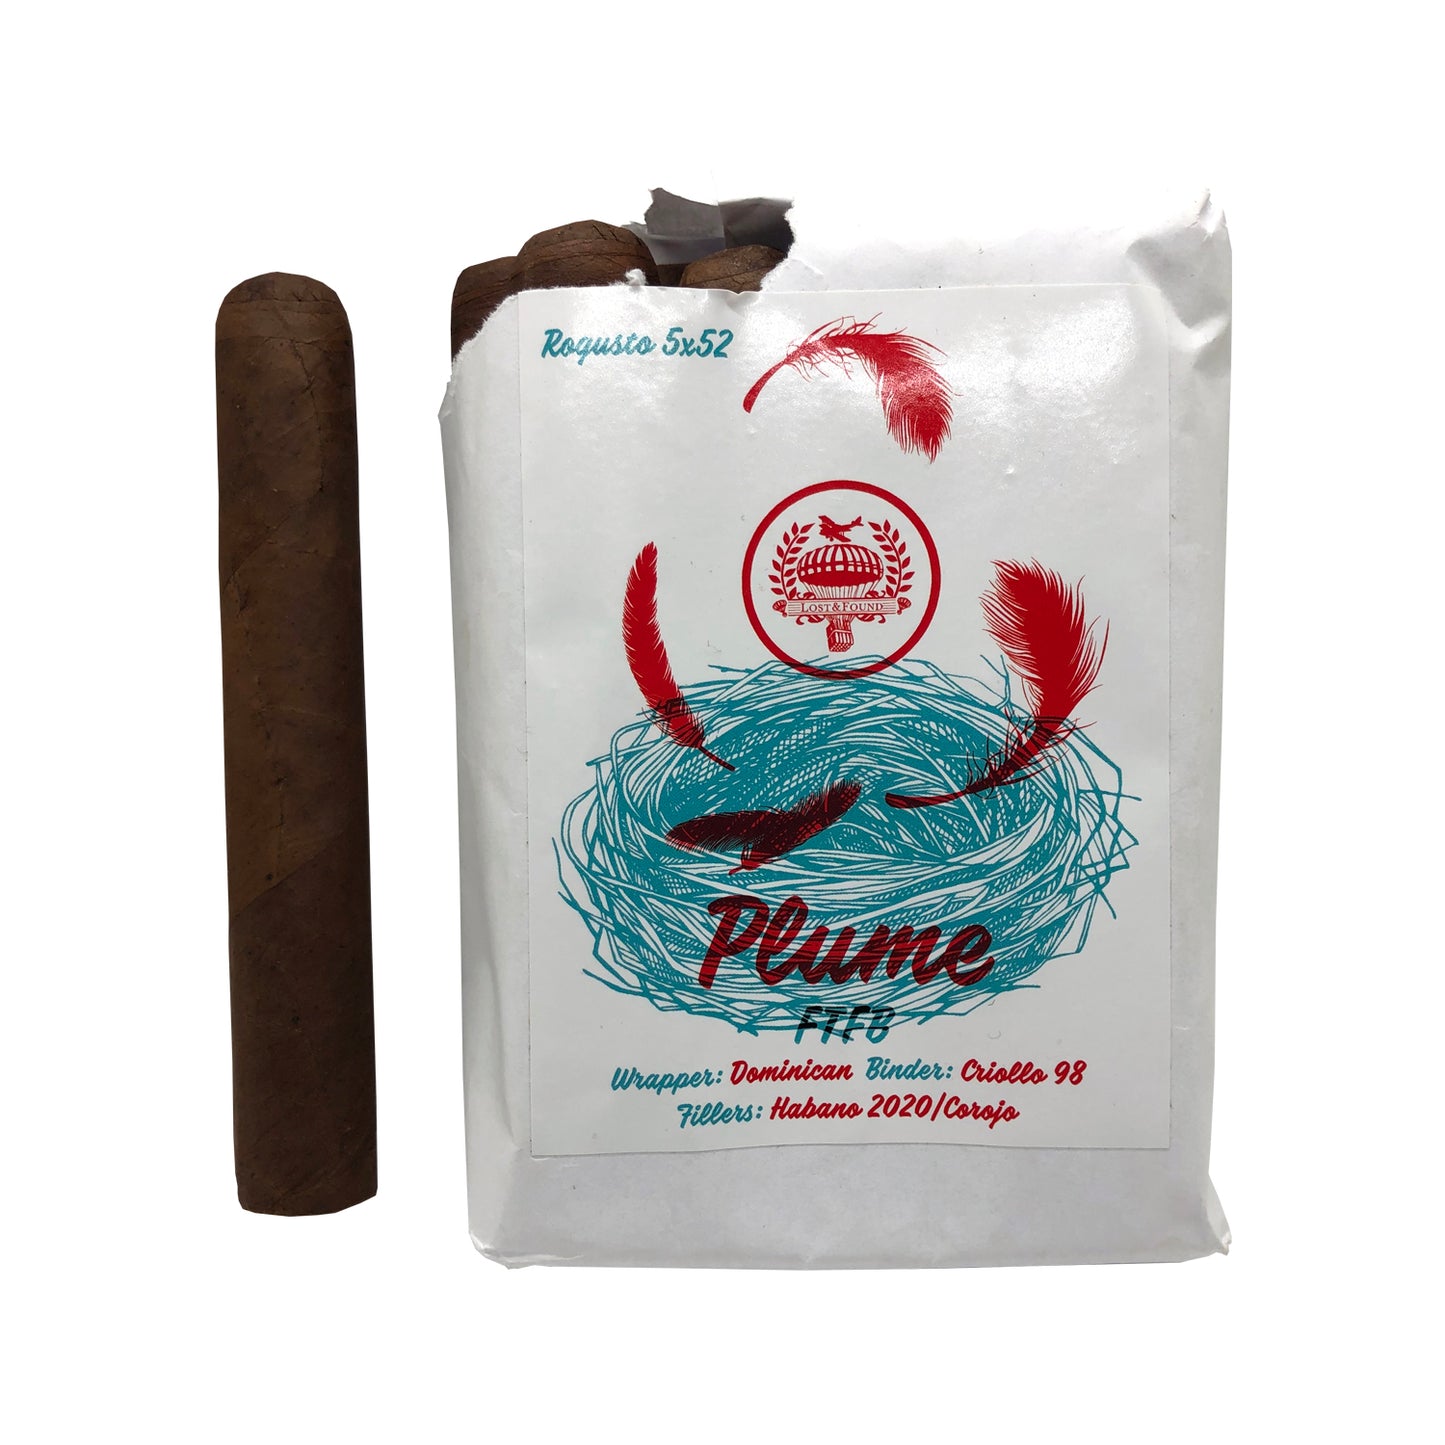 PLUME by Lost & Found Cigars